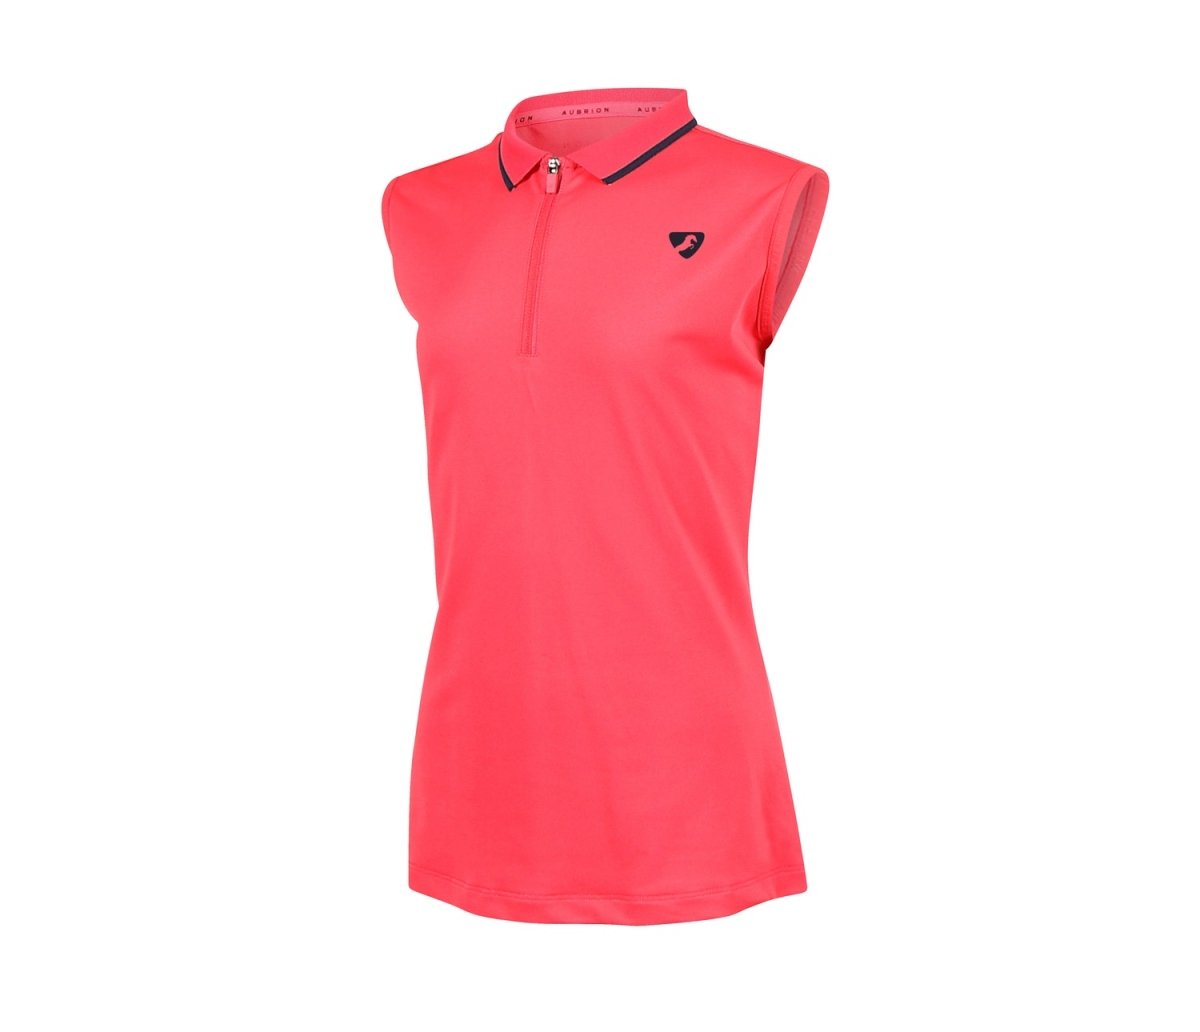 Aubrion SS24 Poise Sleeveless Tech Polo - Young Rider - Coral - 11/12 Years